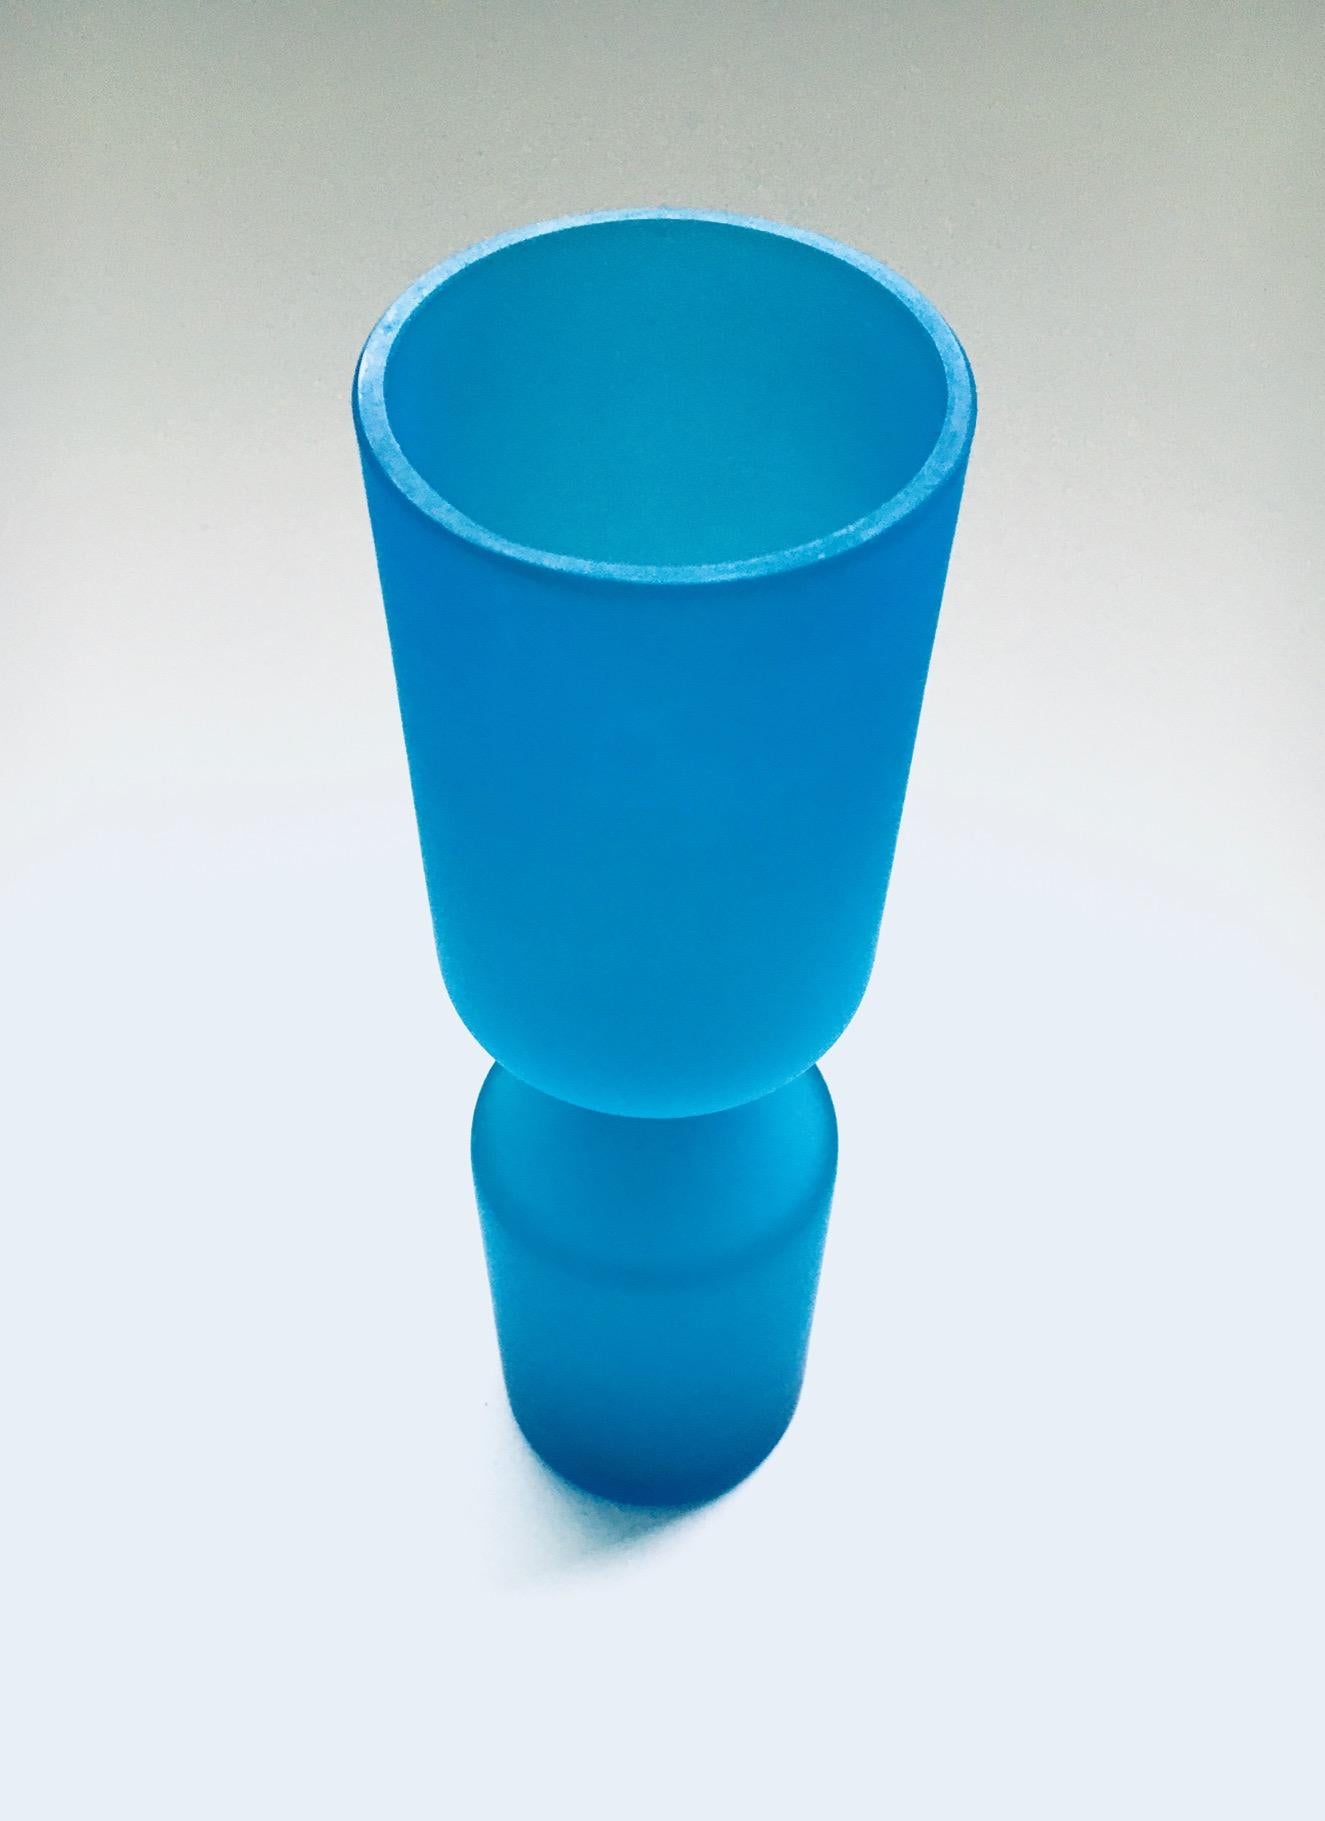 Art Glass Blue Glazed Vase Satinato by Carlo Moretti for Rosenthal Netter, Italy In Excellent Condition For Sale In Oud-Turnhout, VAN